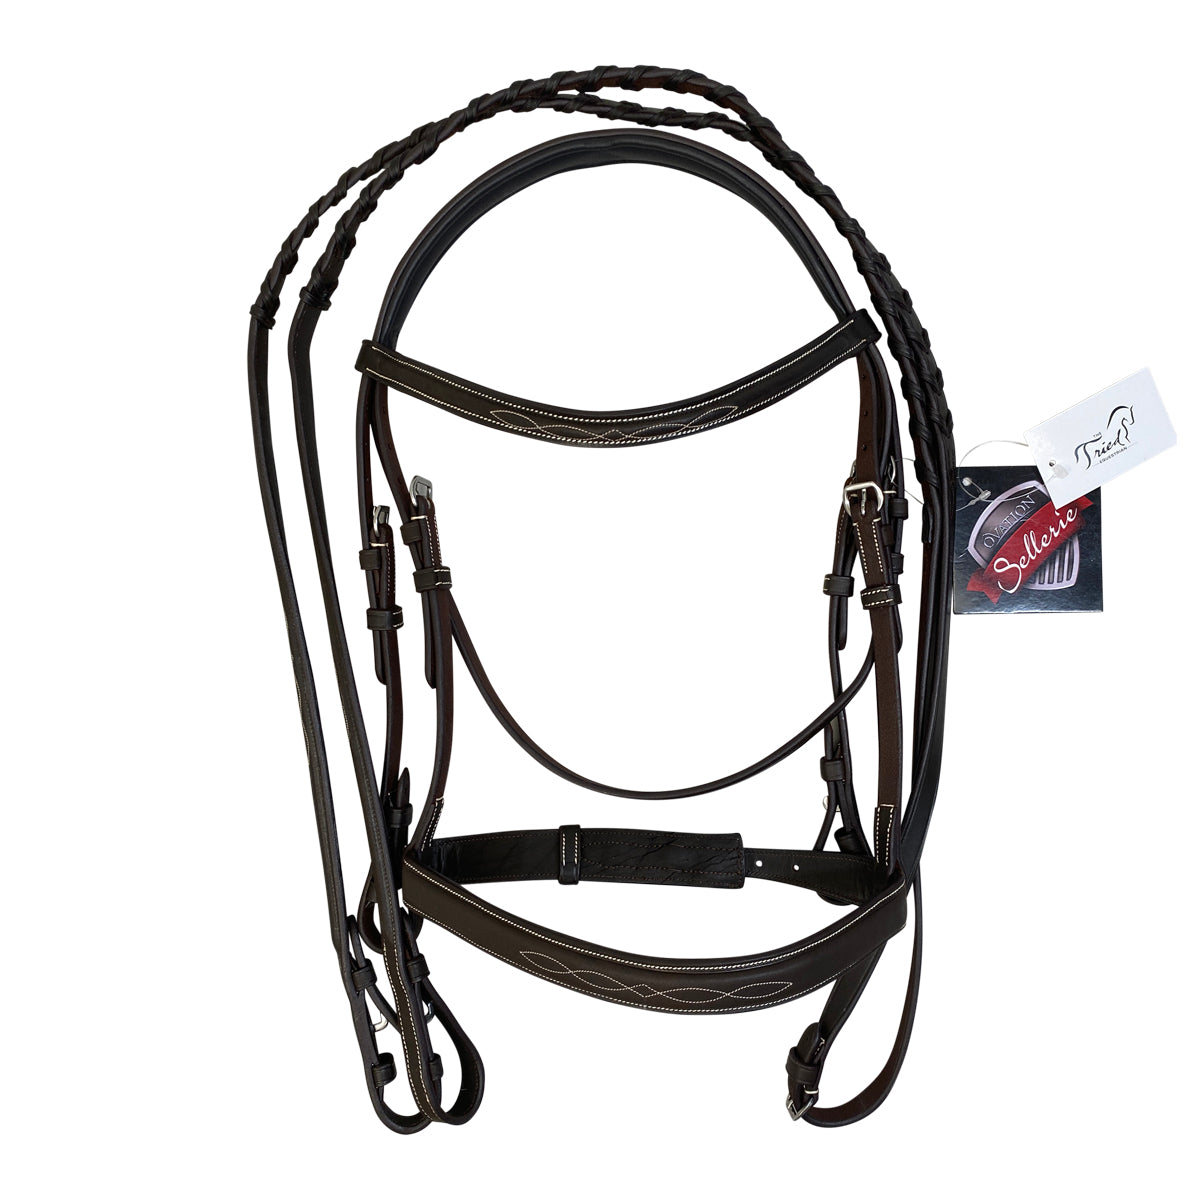 Ovation Classic 'Fancy Stitched Wide Nose Comfort Crown' Bridle in Brown - Horse